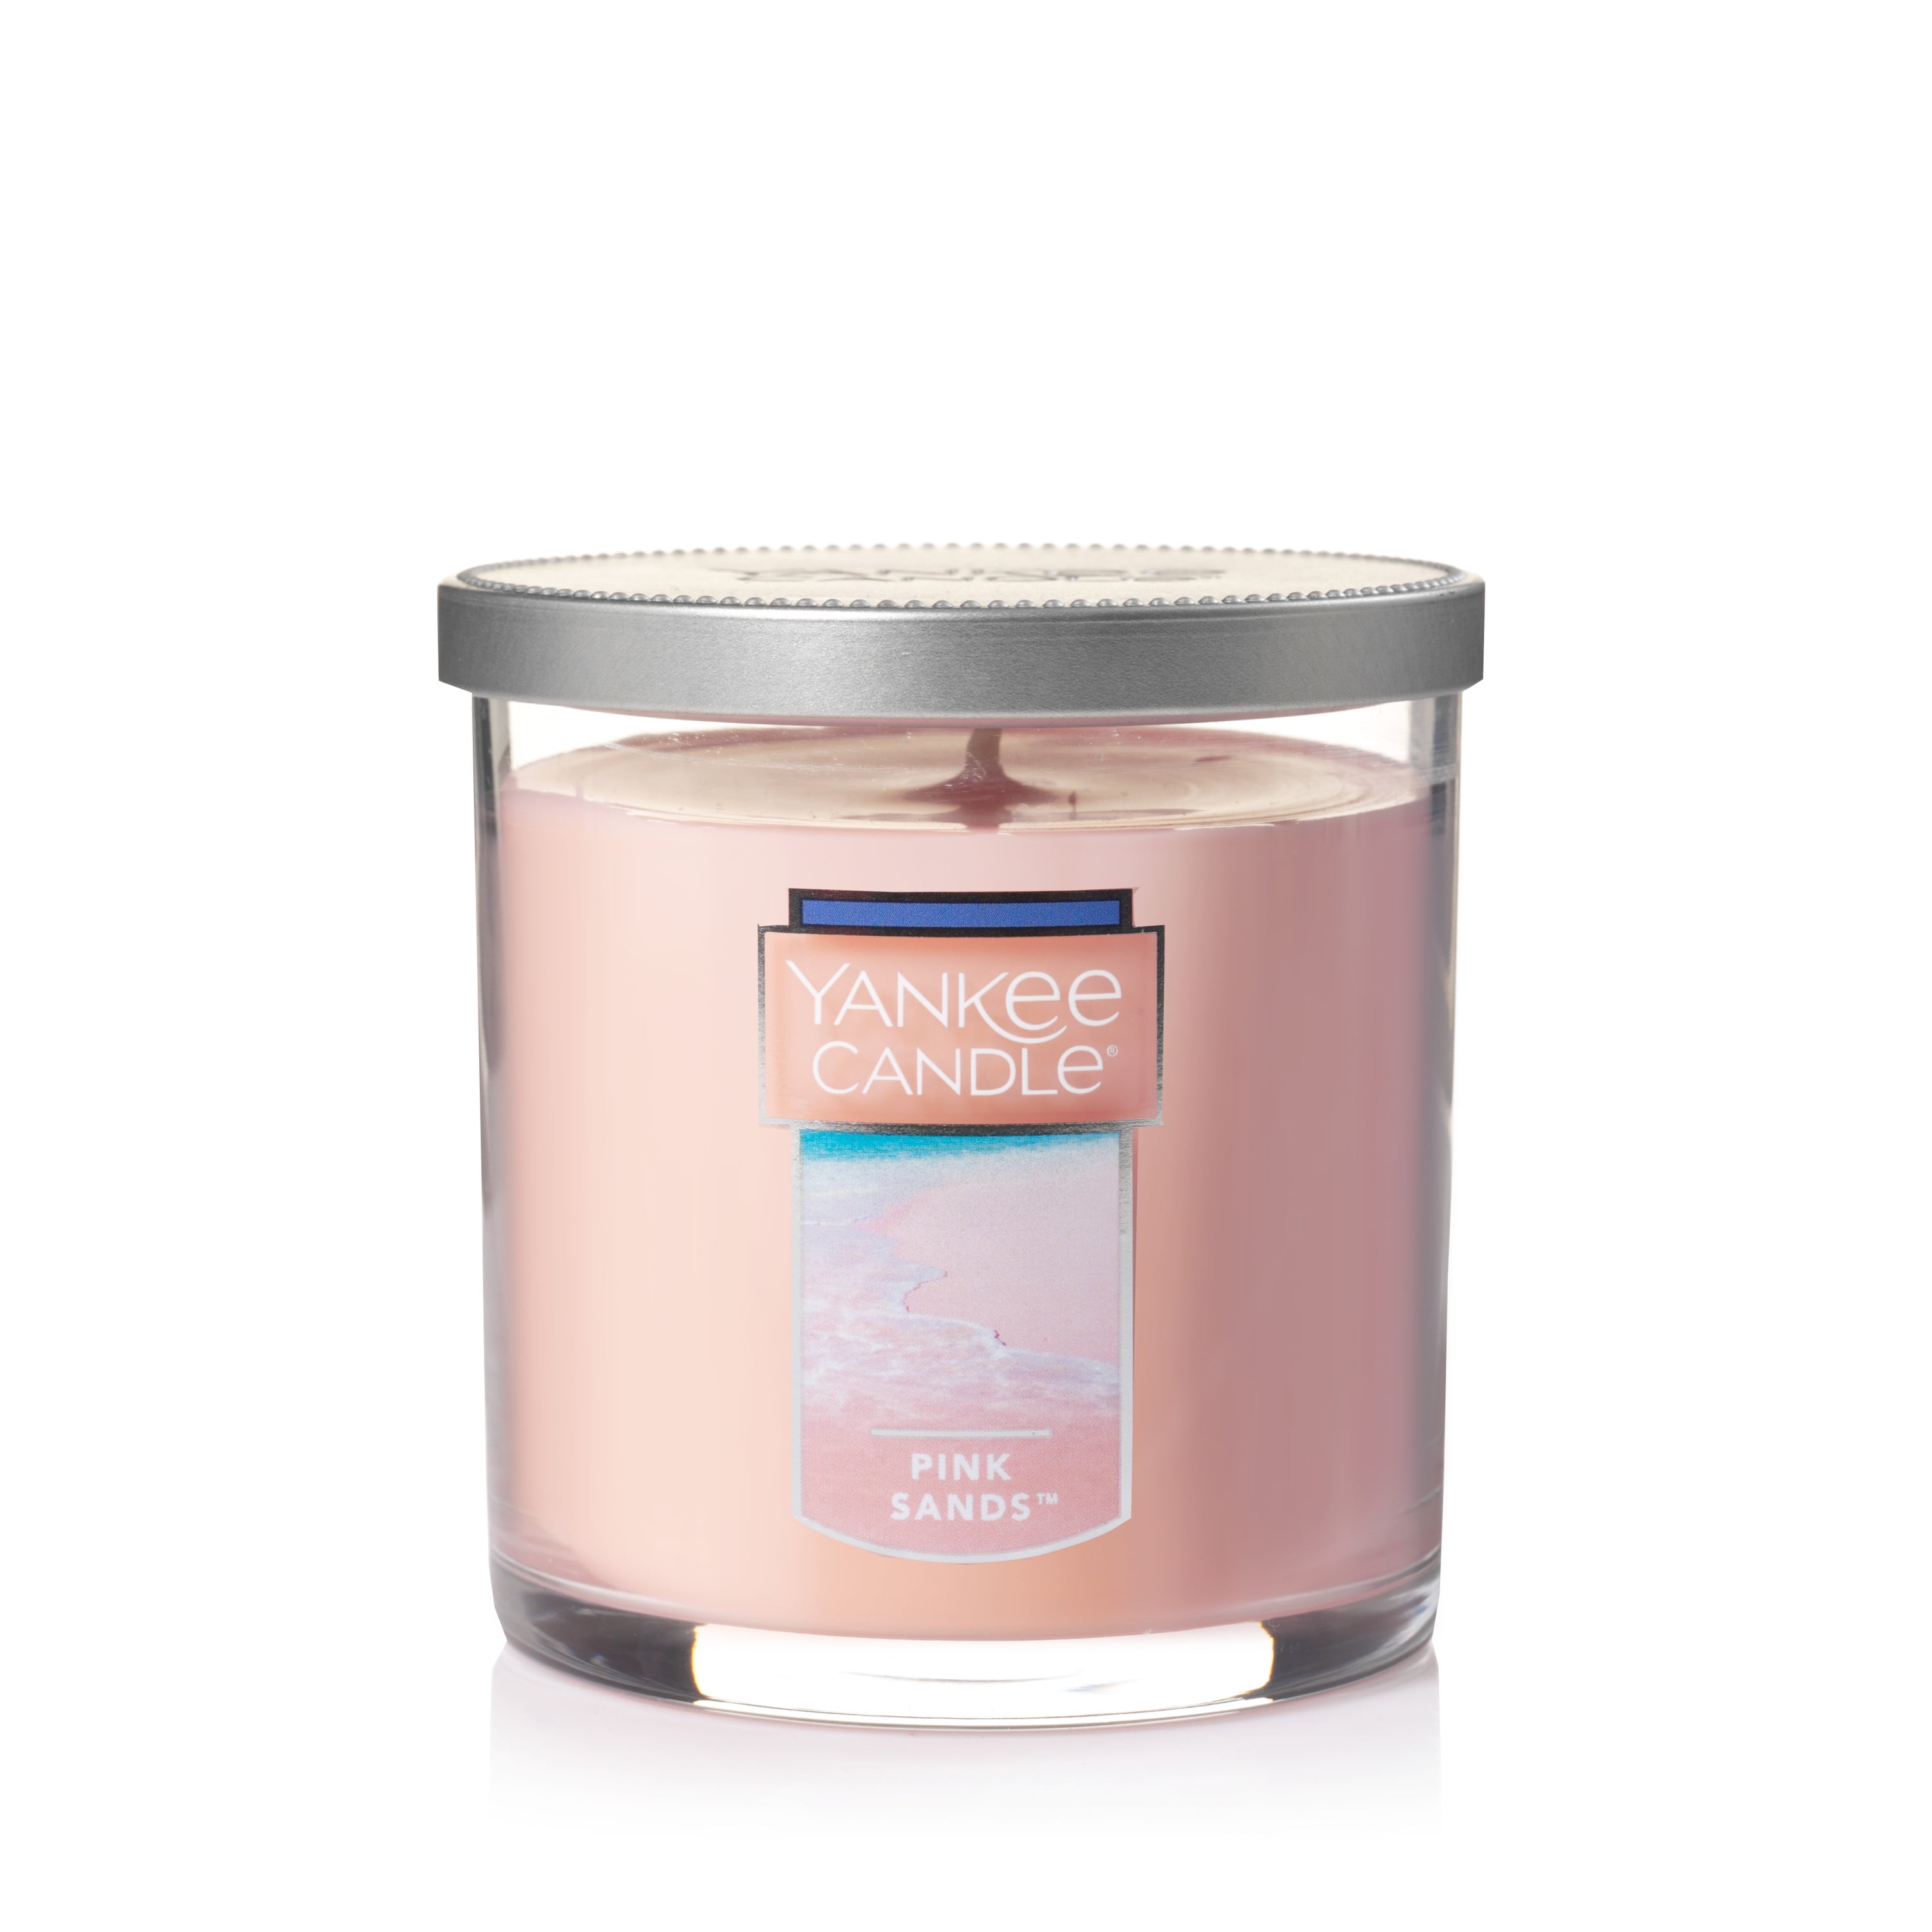 Yankee Candle's New 2021 Scent of the Year Smells Like a Tropical Paradise